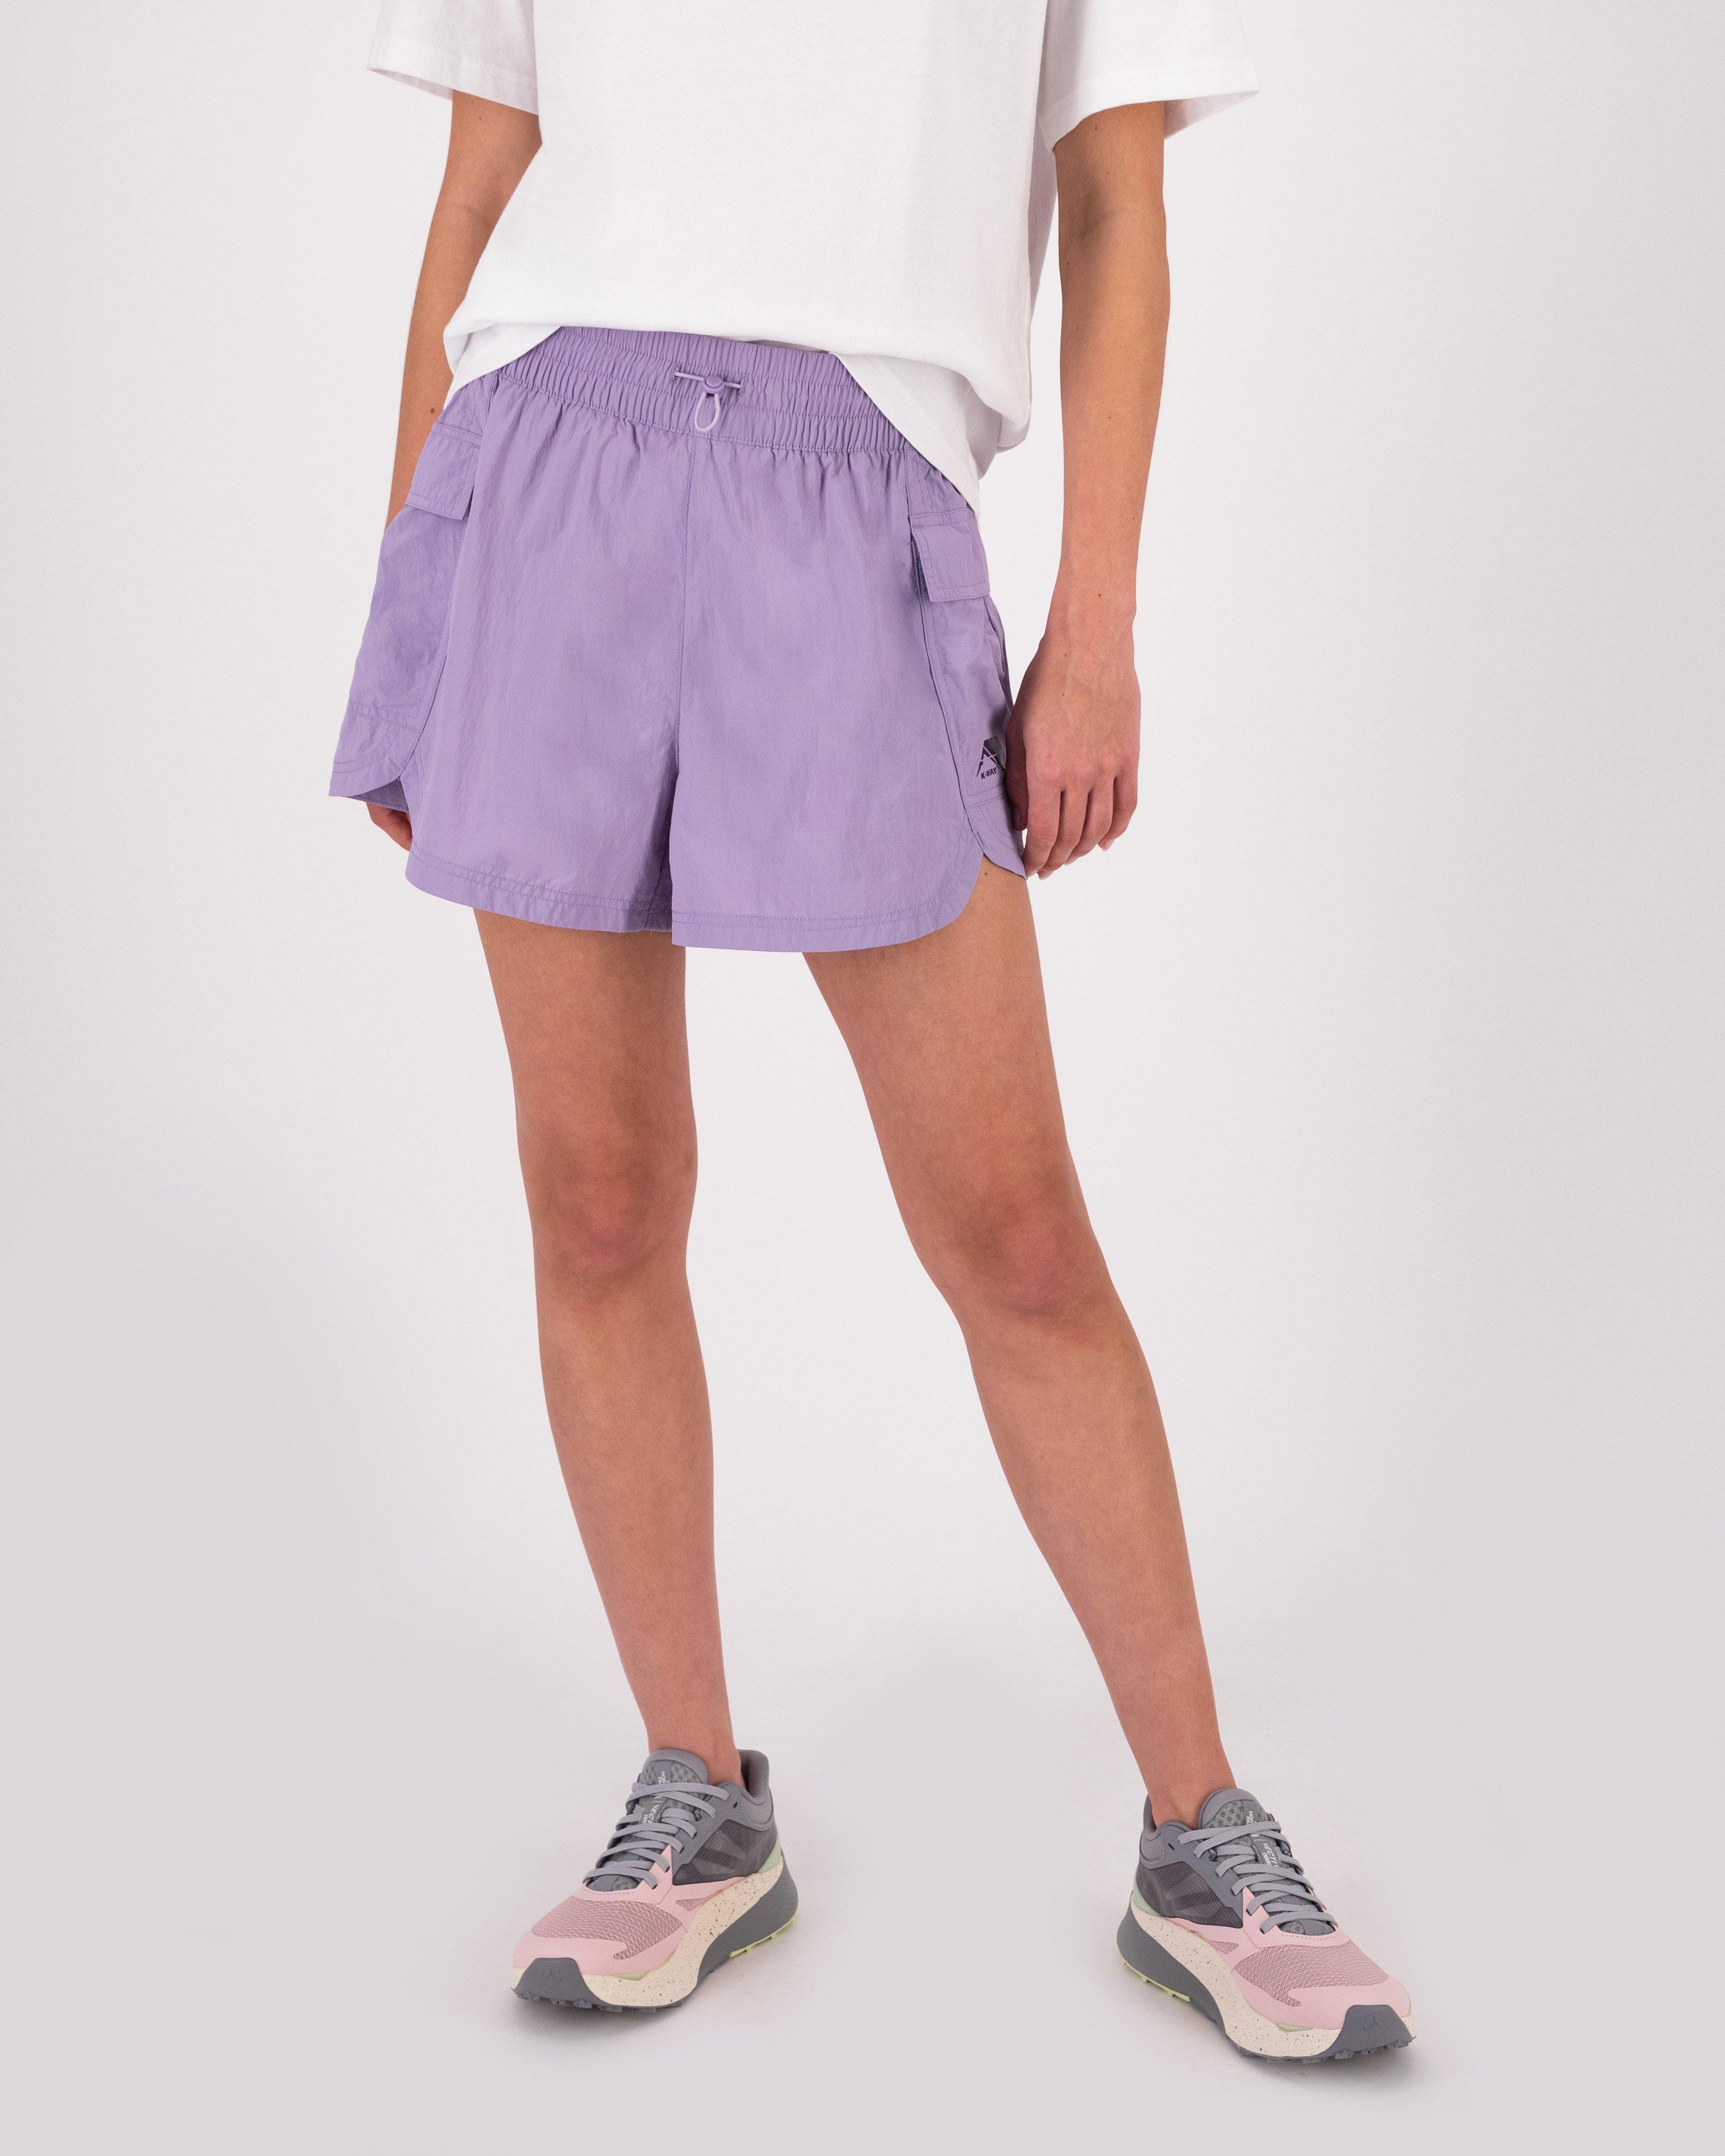 K-Way MMXXI Women’s Absail Shorts -  Light Lilac